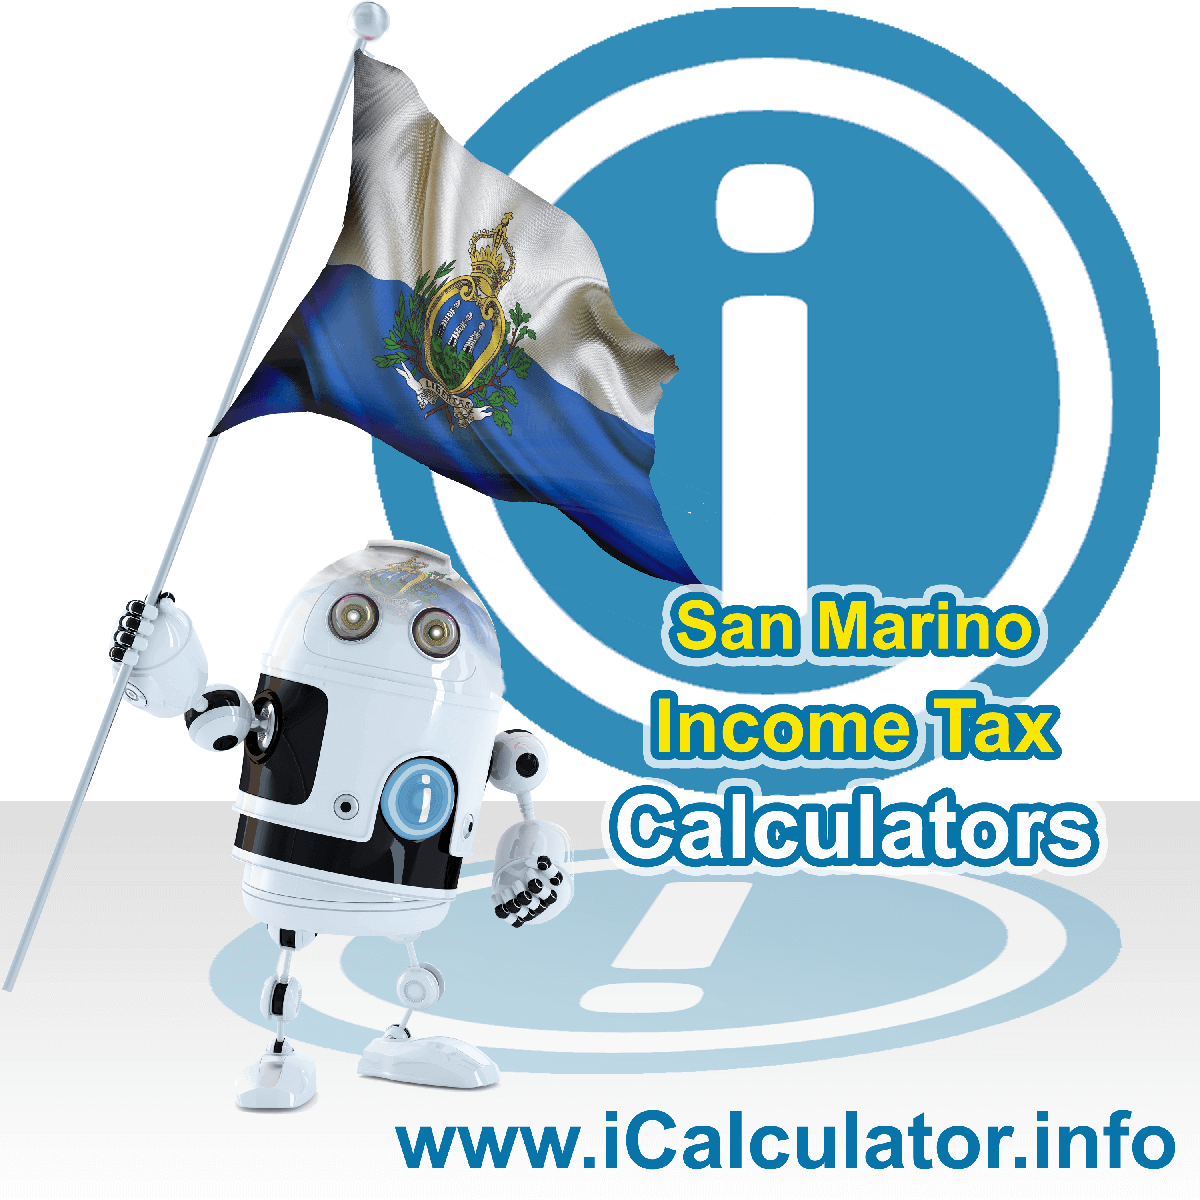 San Marino Income Tax Calculator. This image shows a new employer in San Marino calculating the annual payroll costs based on multiple payroll payments in one year in San Marino using the San Marino income tax calculator to understand their payroll costs in San Marino in 2022